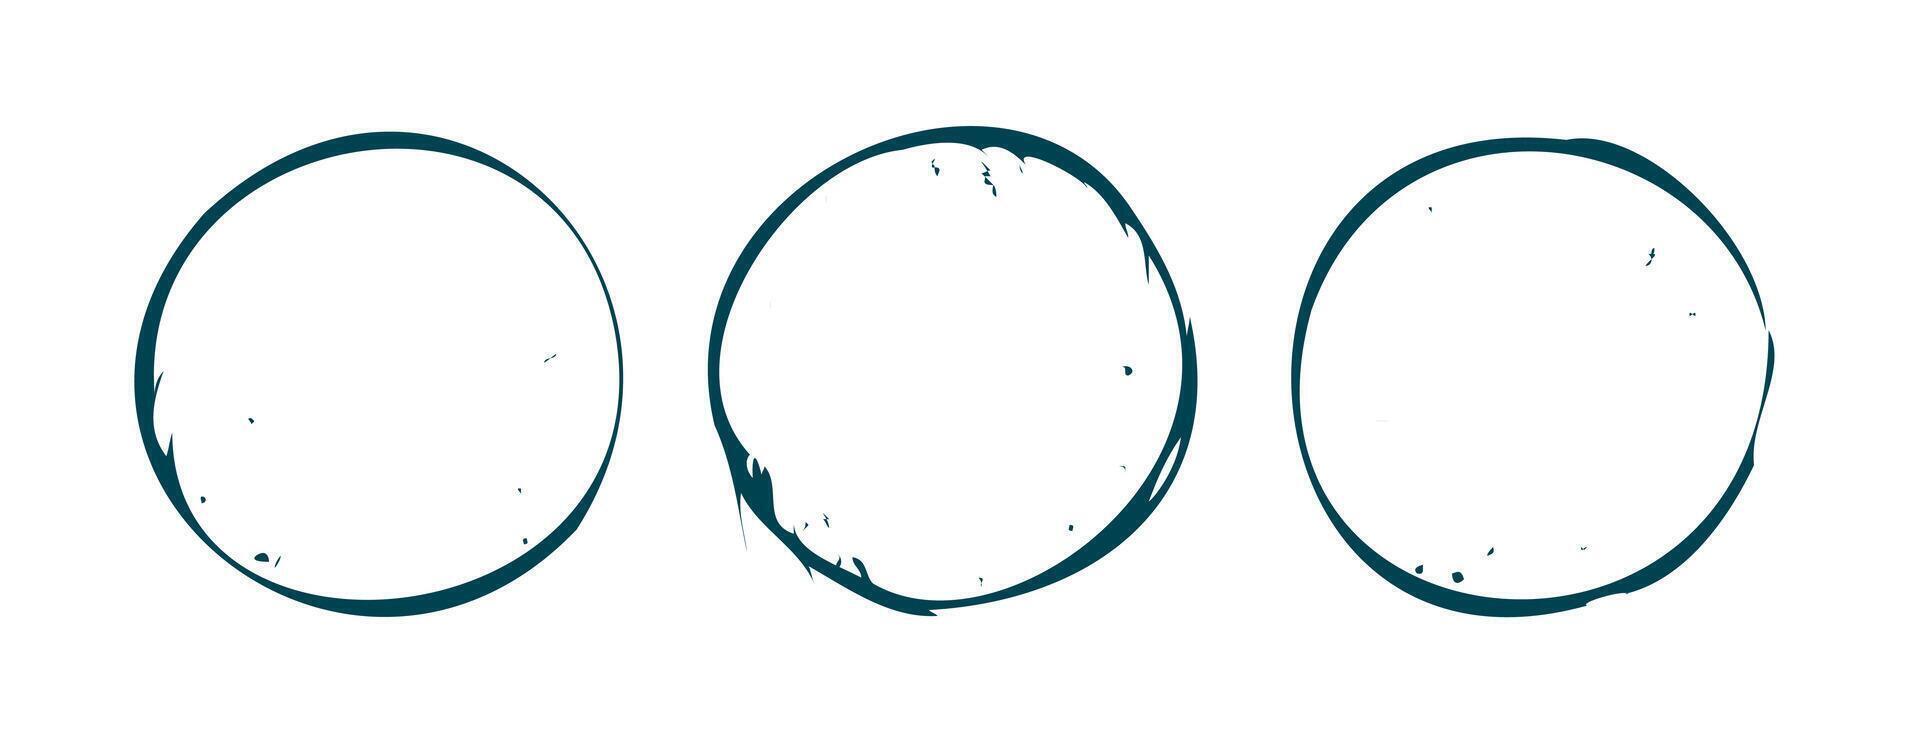 pack of three empty enso round frame in grungy style vector